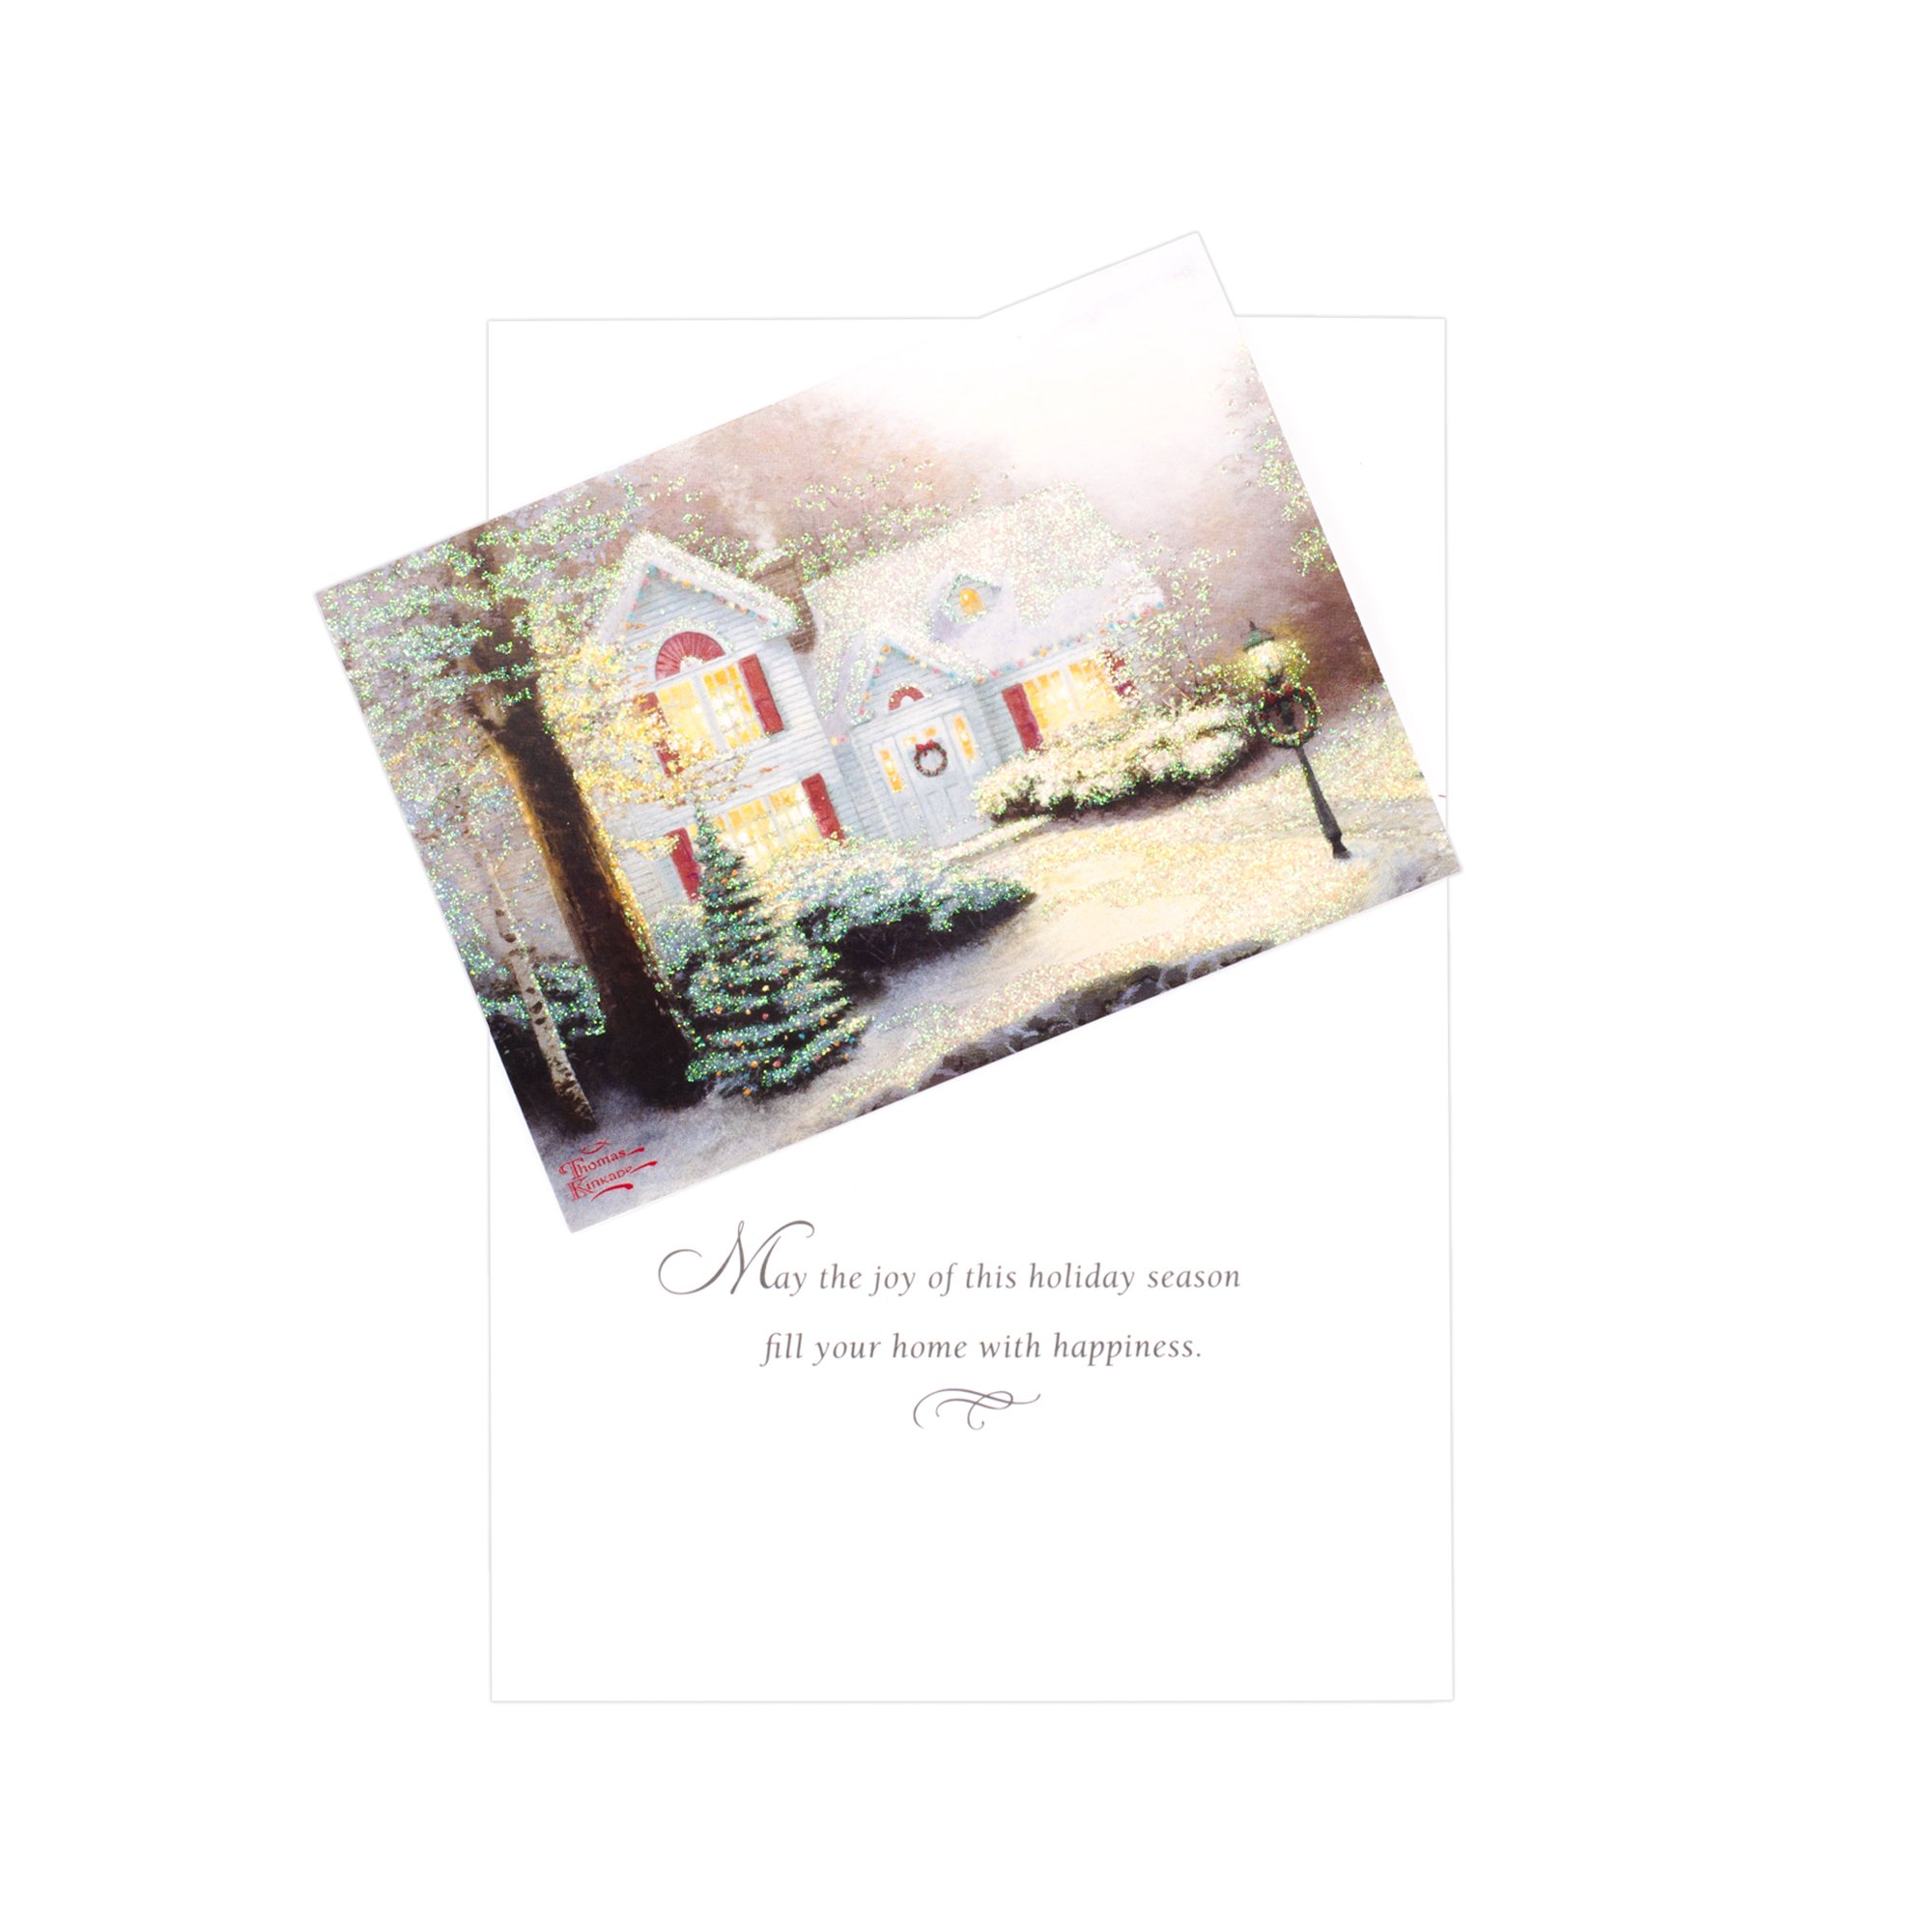 Hallmark Thomas Kinkade Boxed Christmas Cards Assortment, Snowy Houses (40 Cards with Envelopes and Foil Seals) (1XPX1761)